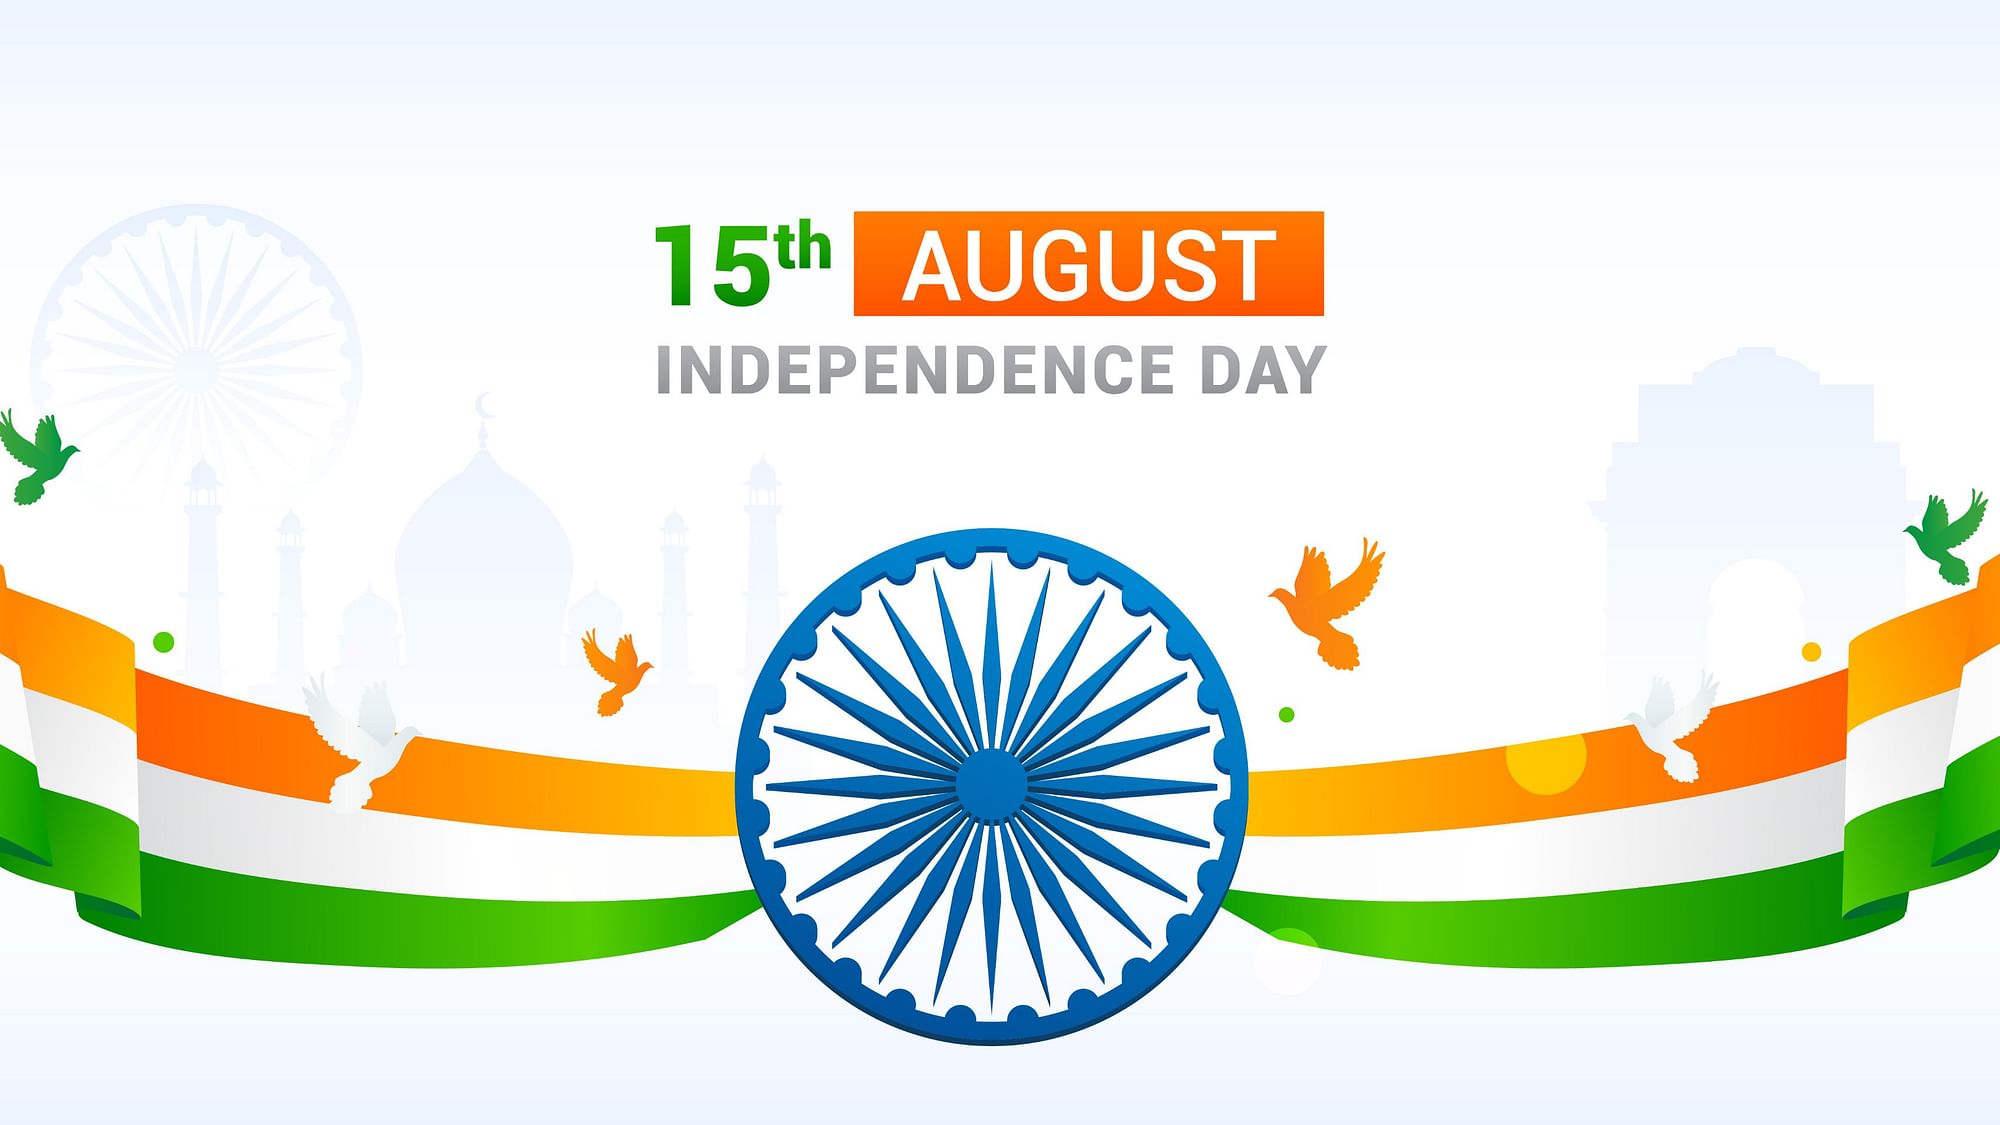 74rd Independence Day Wishes and Images.&nbsp;